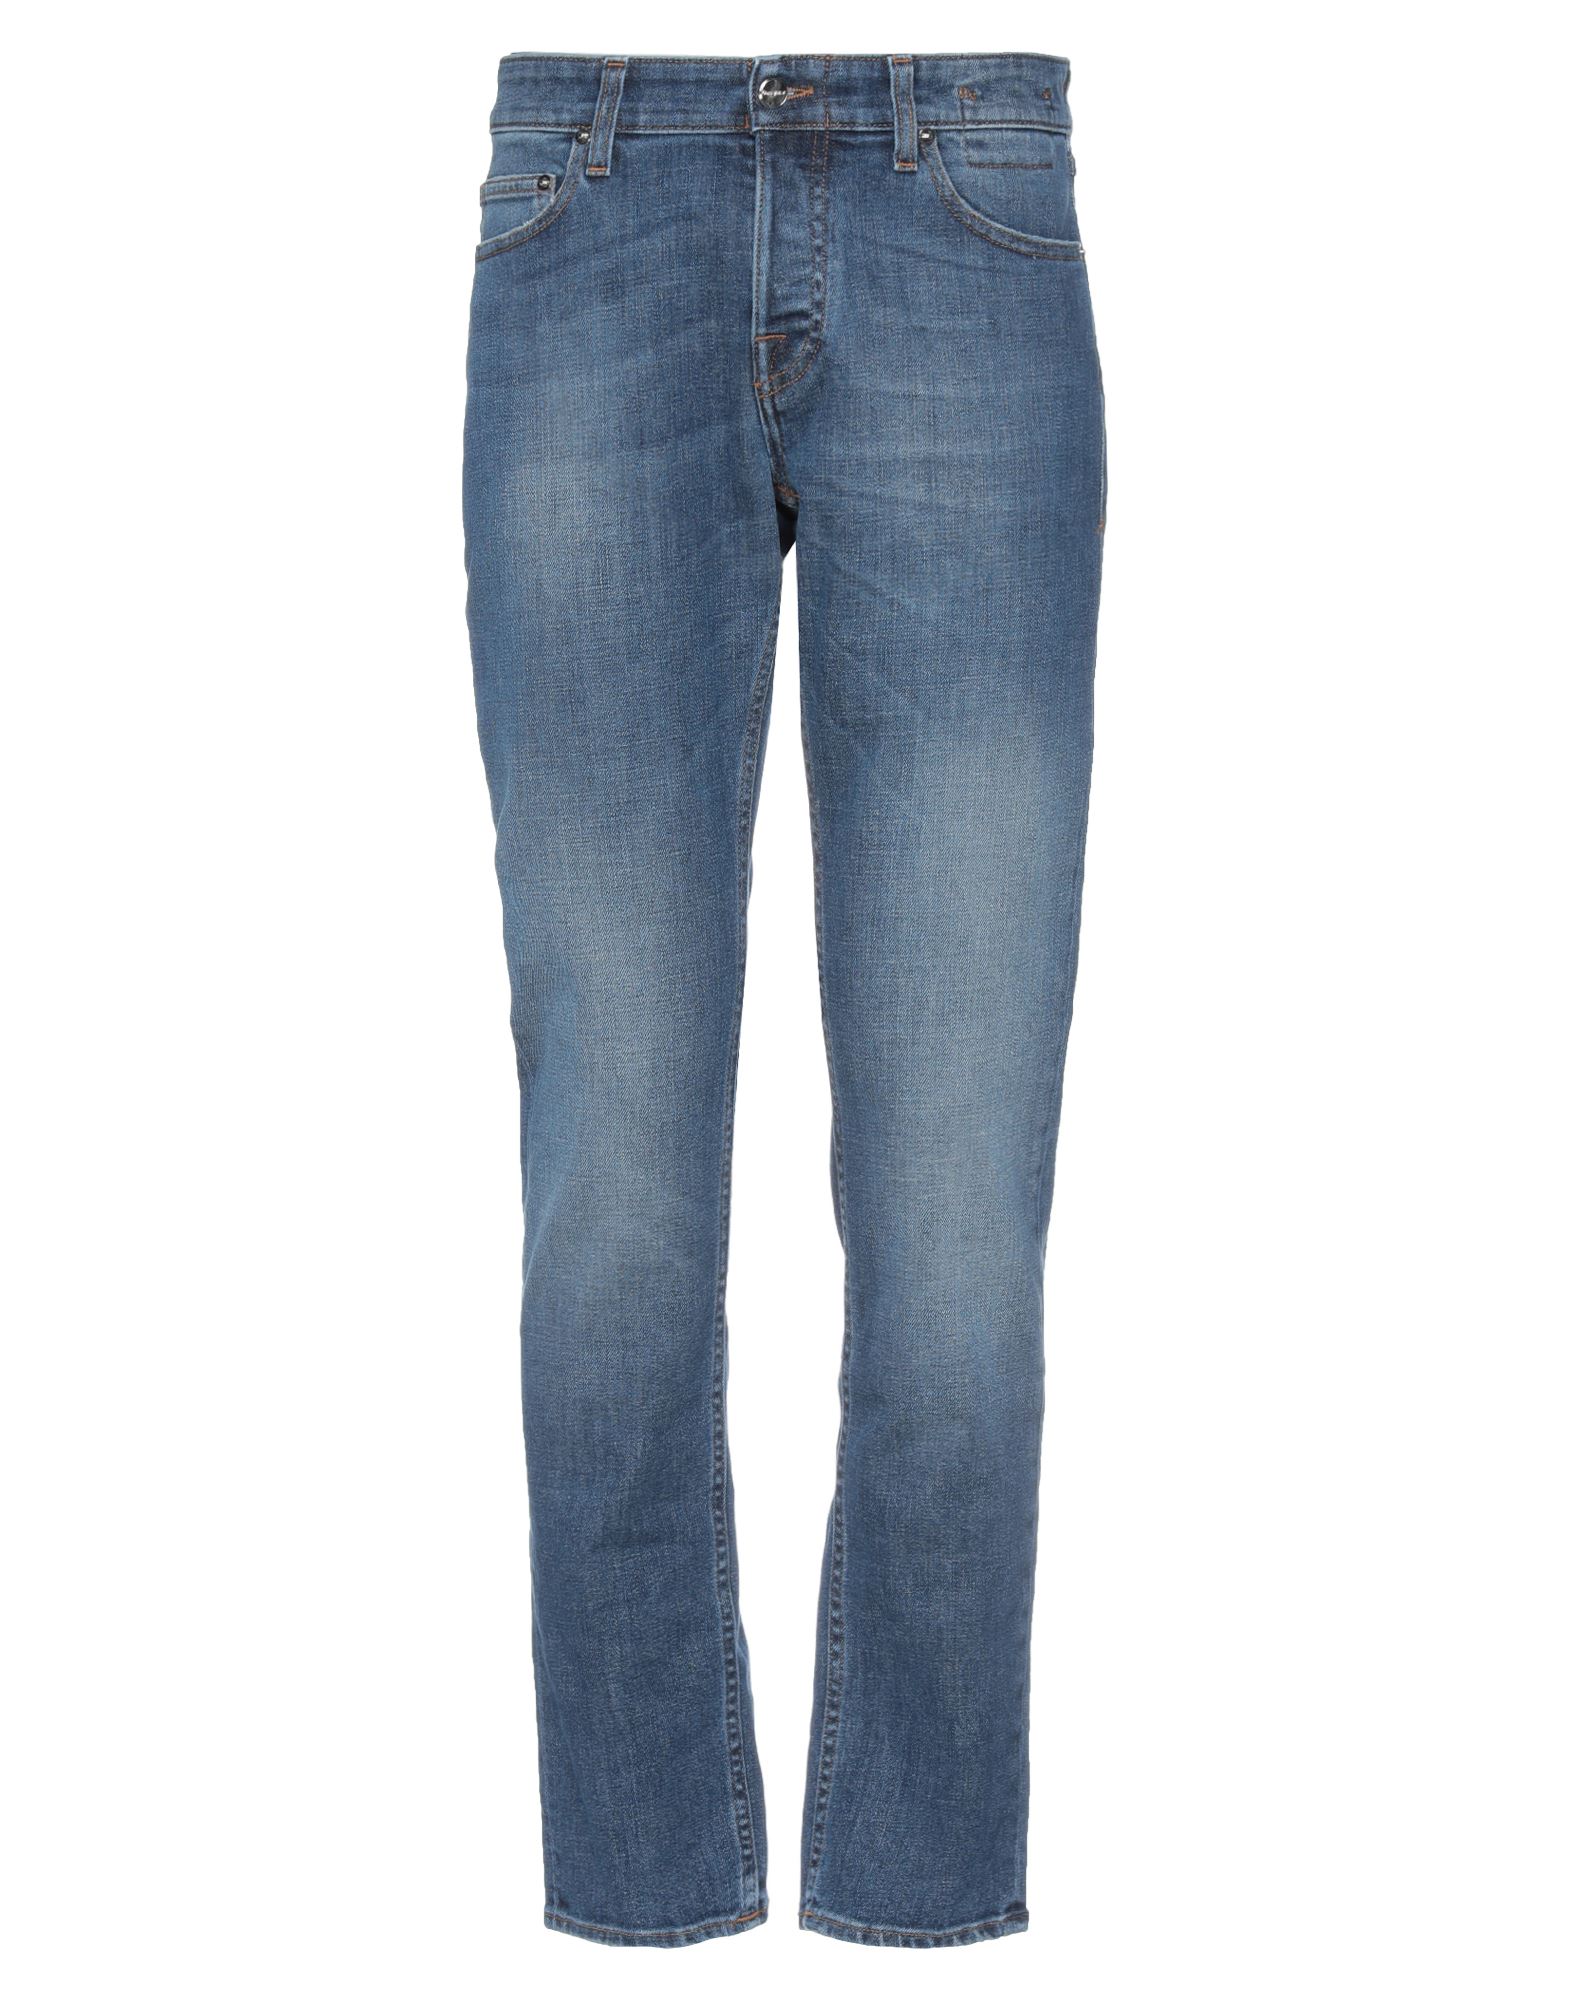 Care Label Jeans In Blue | ModeSens